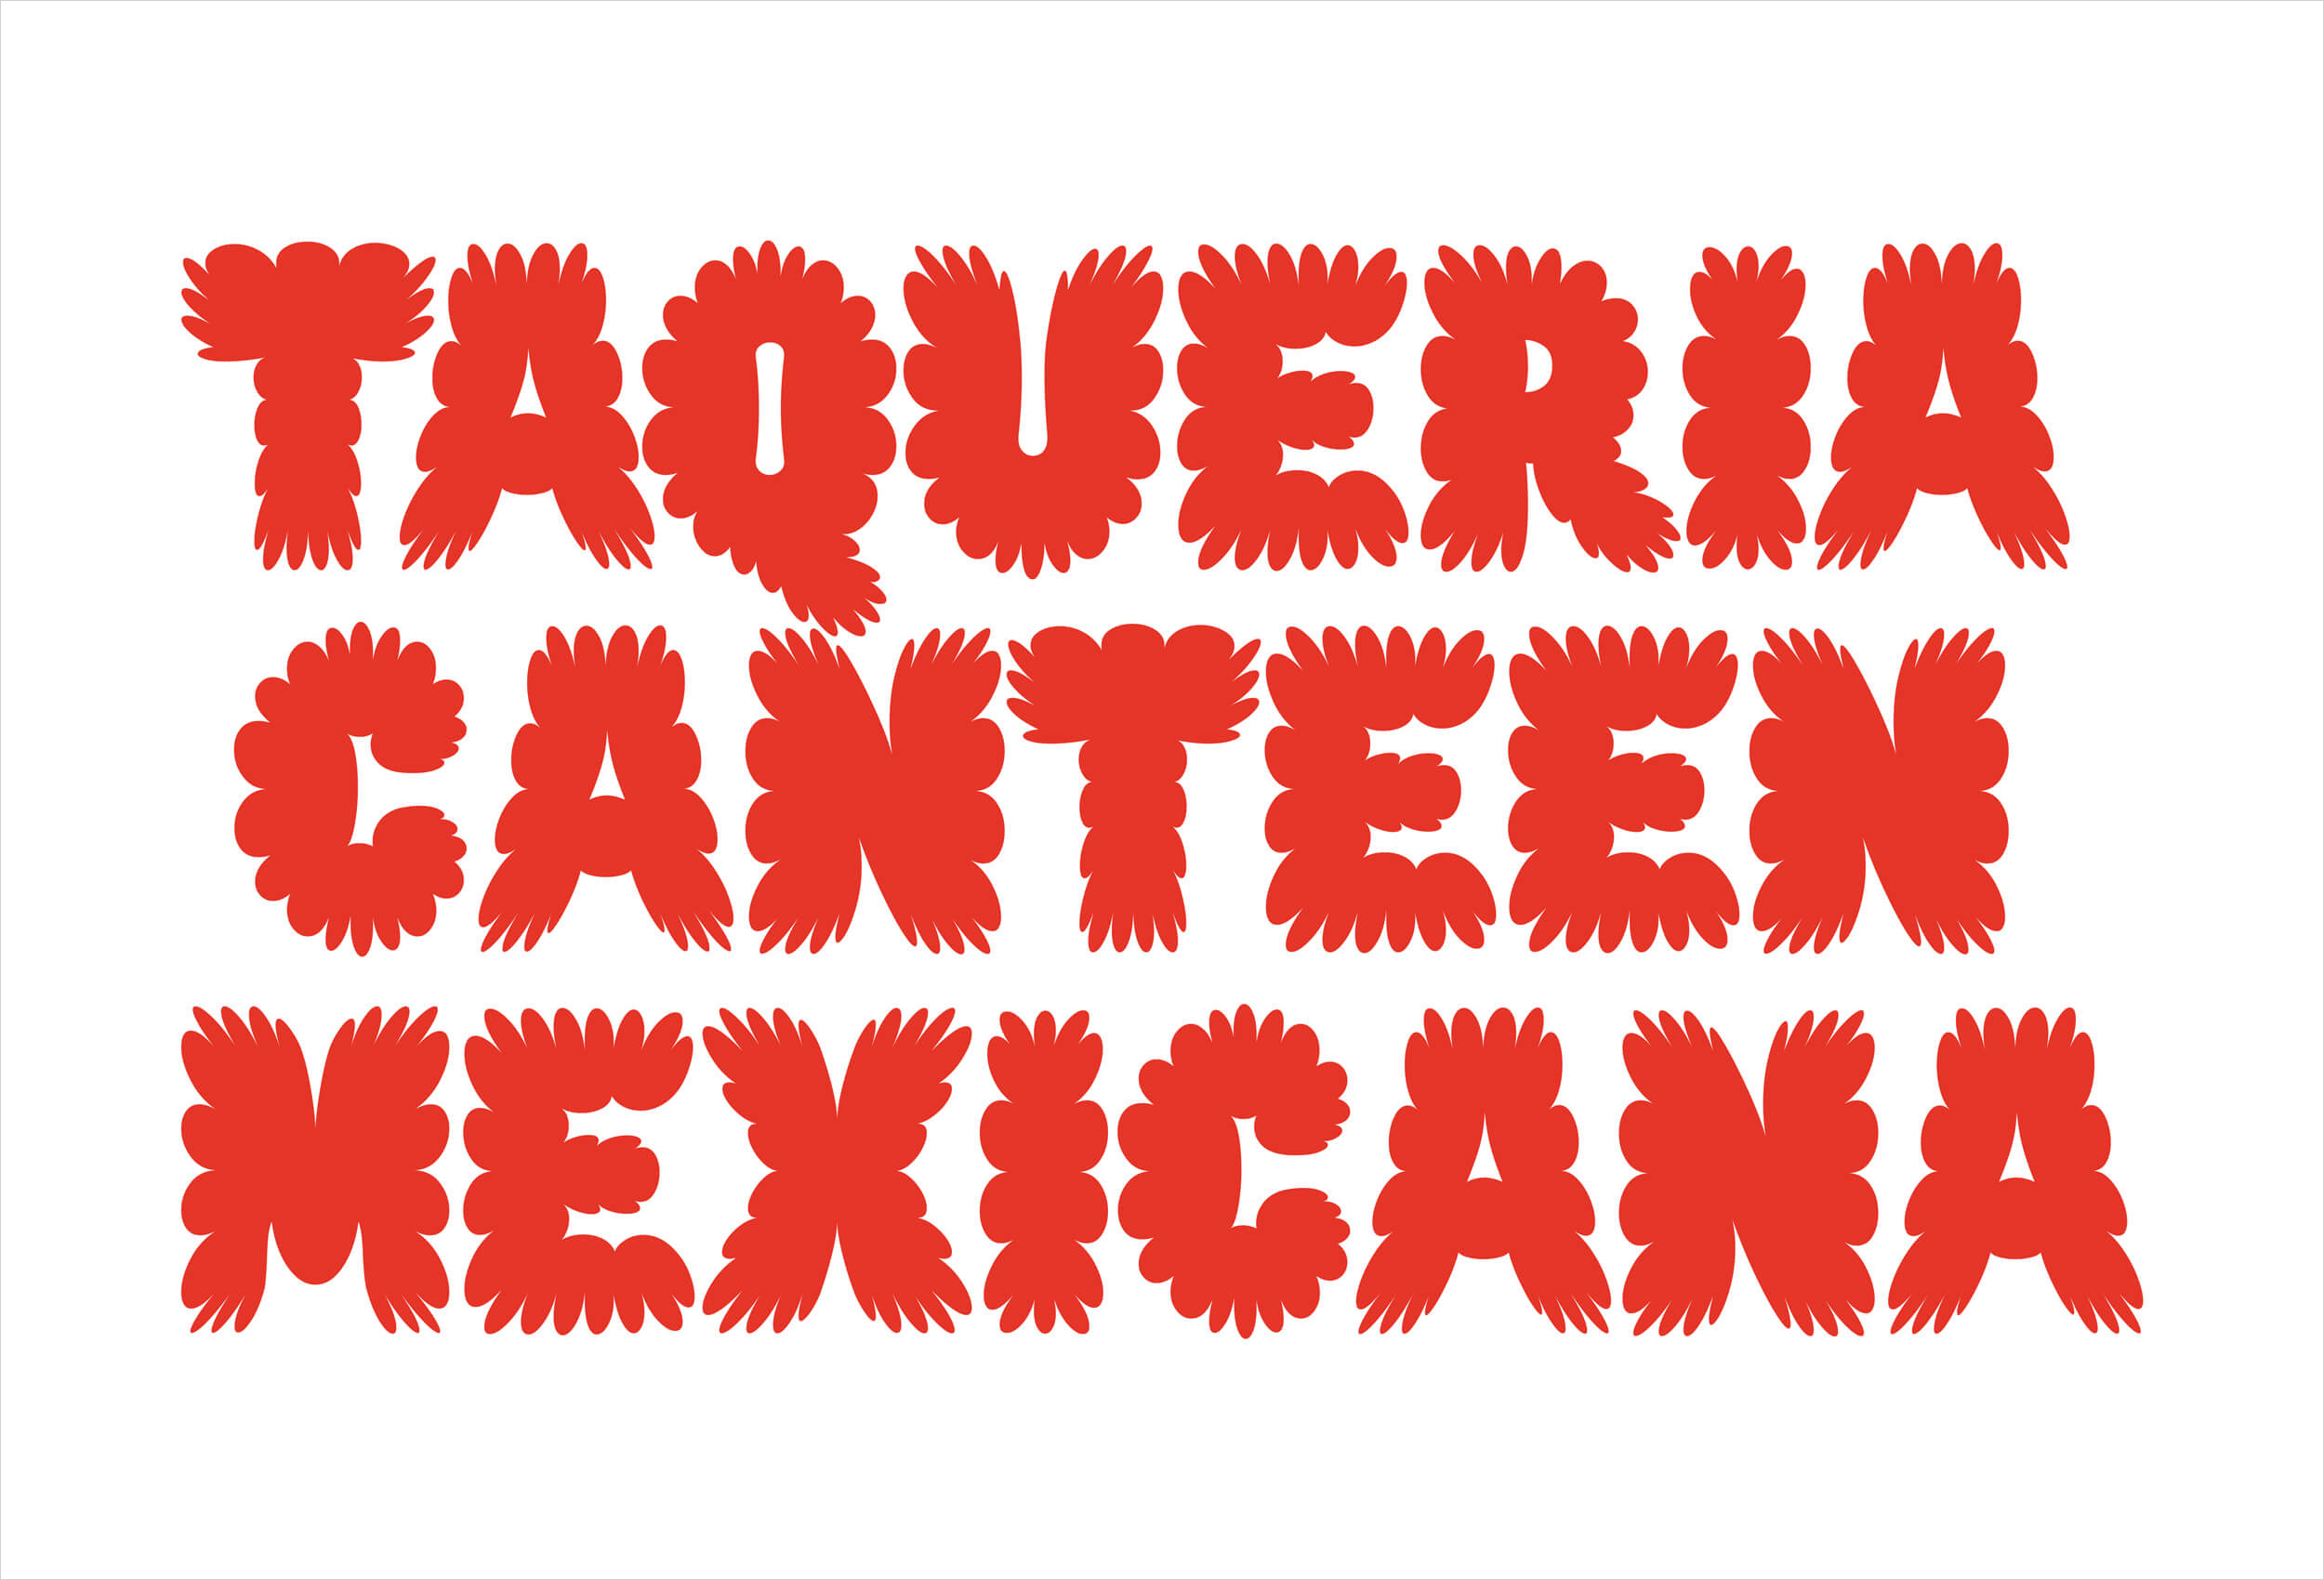 A flora-inspired custom typeface and logotype designed by Seachange for Mama Mexa, an Auckland-based taco pop-up